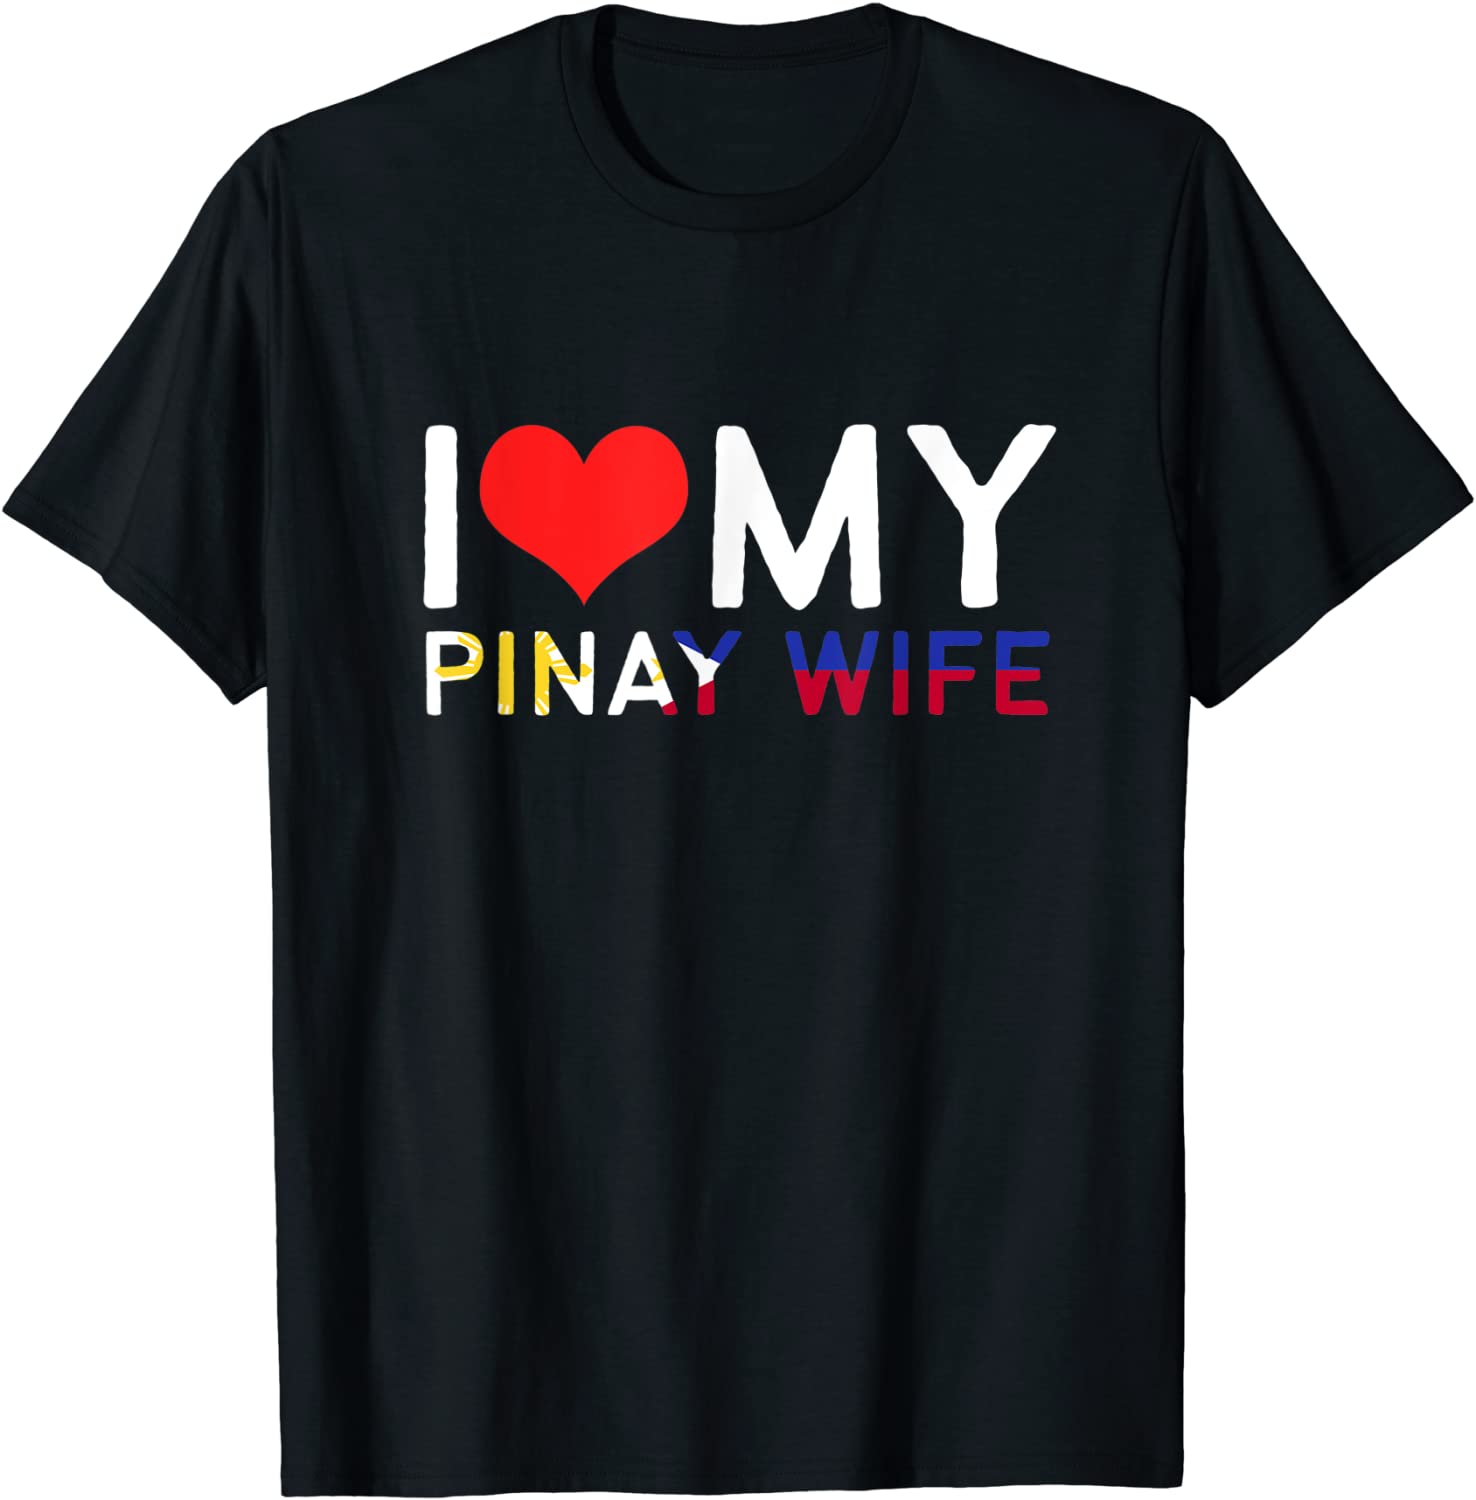 I Love My Pinay Wife Philippines Cotton T Shirt For Men And Women Tee Shirts Adults Tshirts